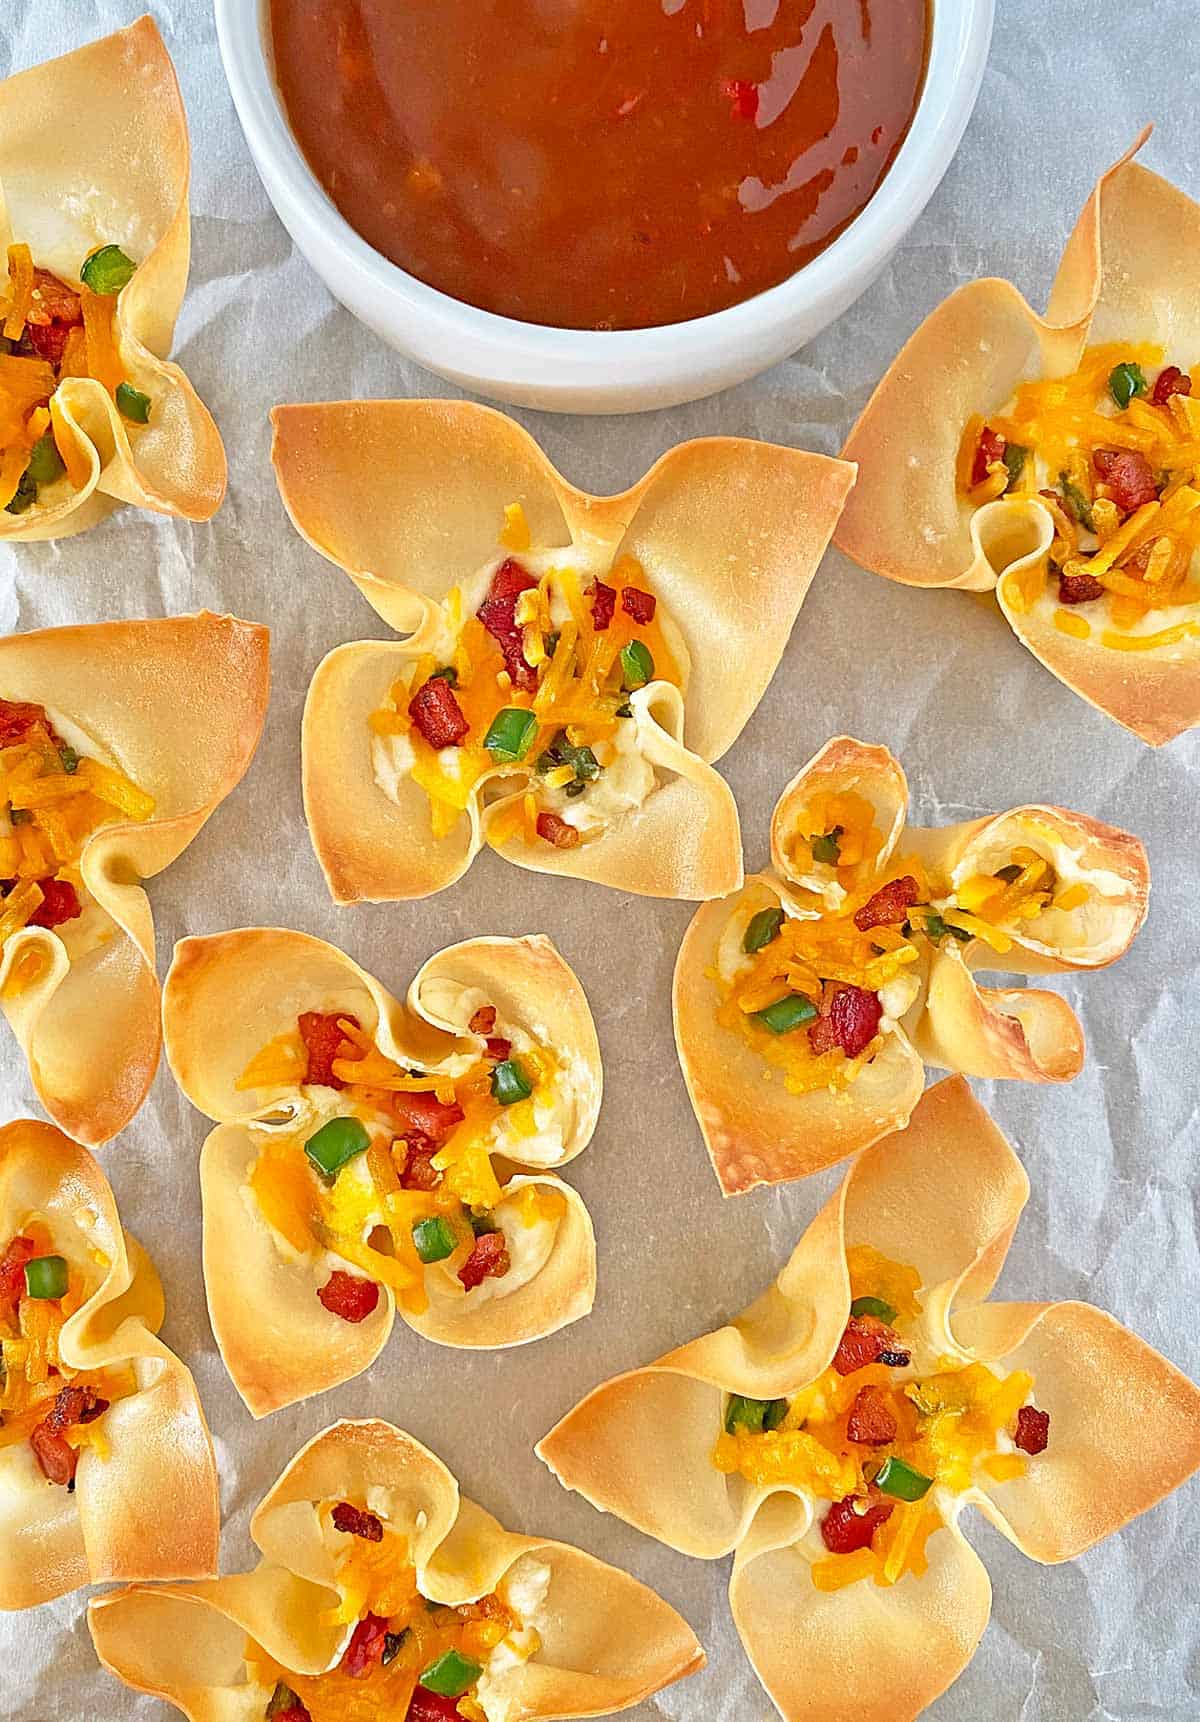 Crispy golden brown wonton appetizers with jalapeno popper filling on parchment paper with a bowl of sweet chili sauce for dipping.